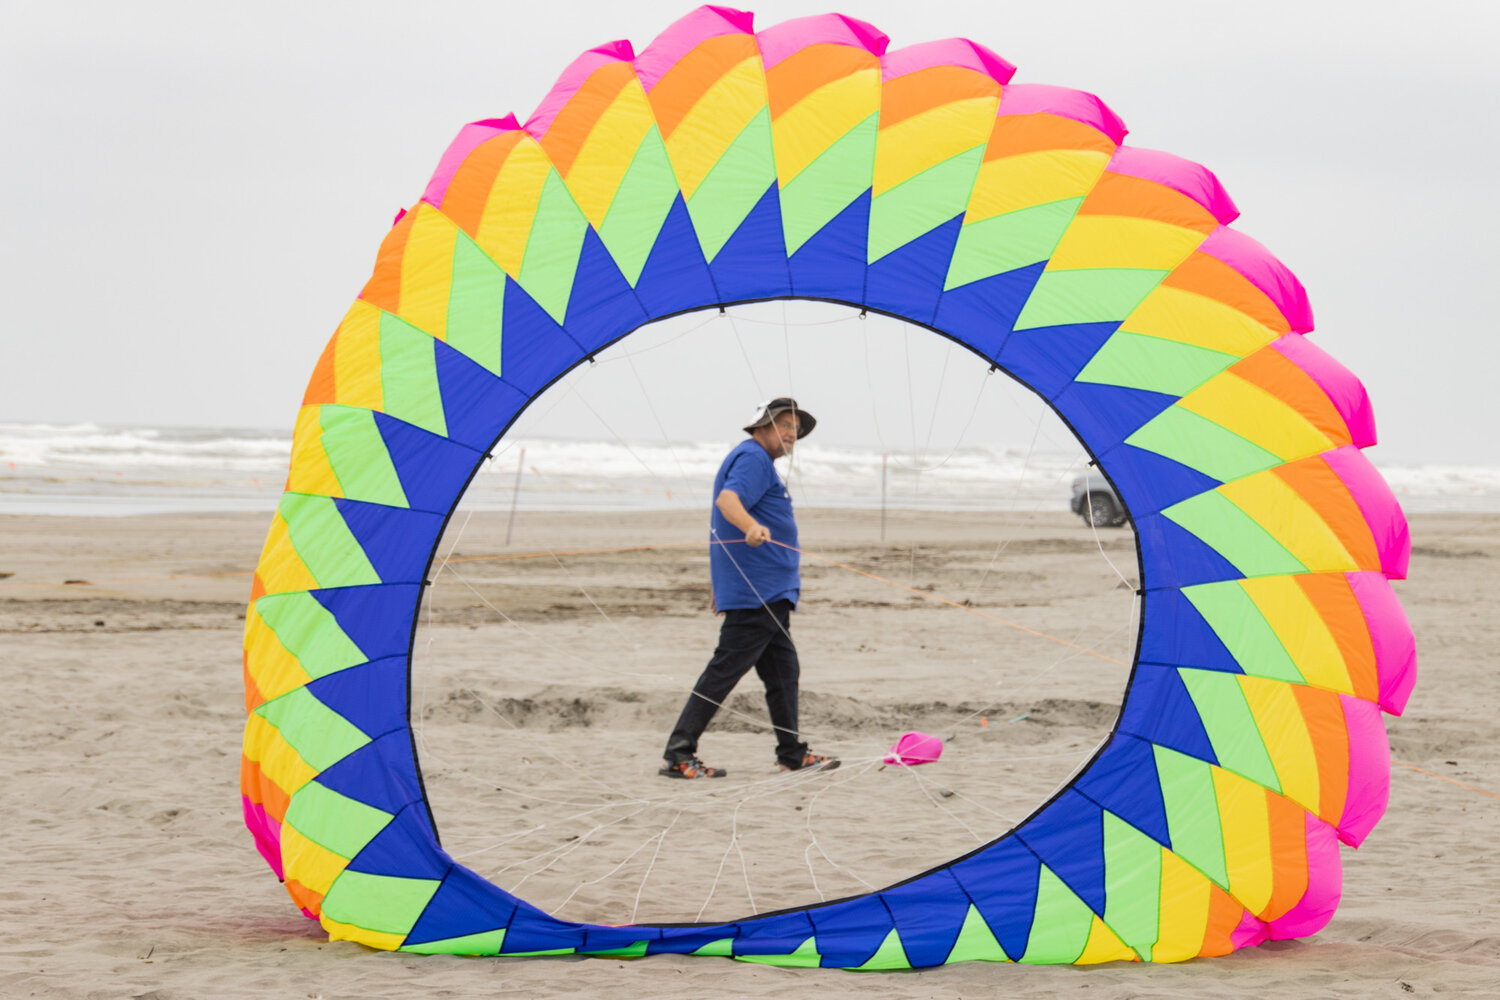 A colorful circular kite gets ready to fly at the Washington State International Kite Festival in Long Beach